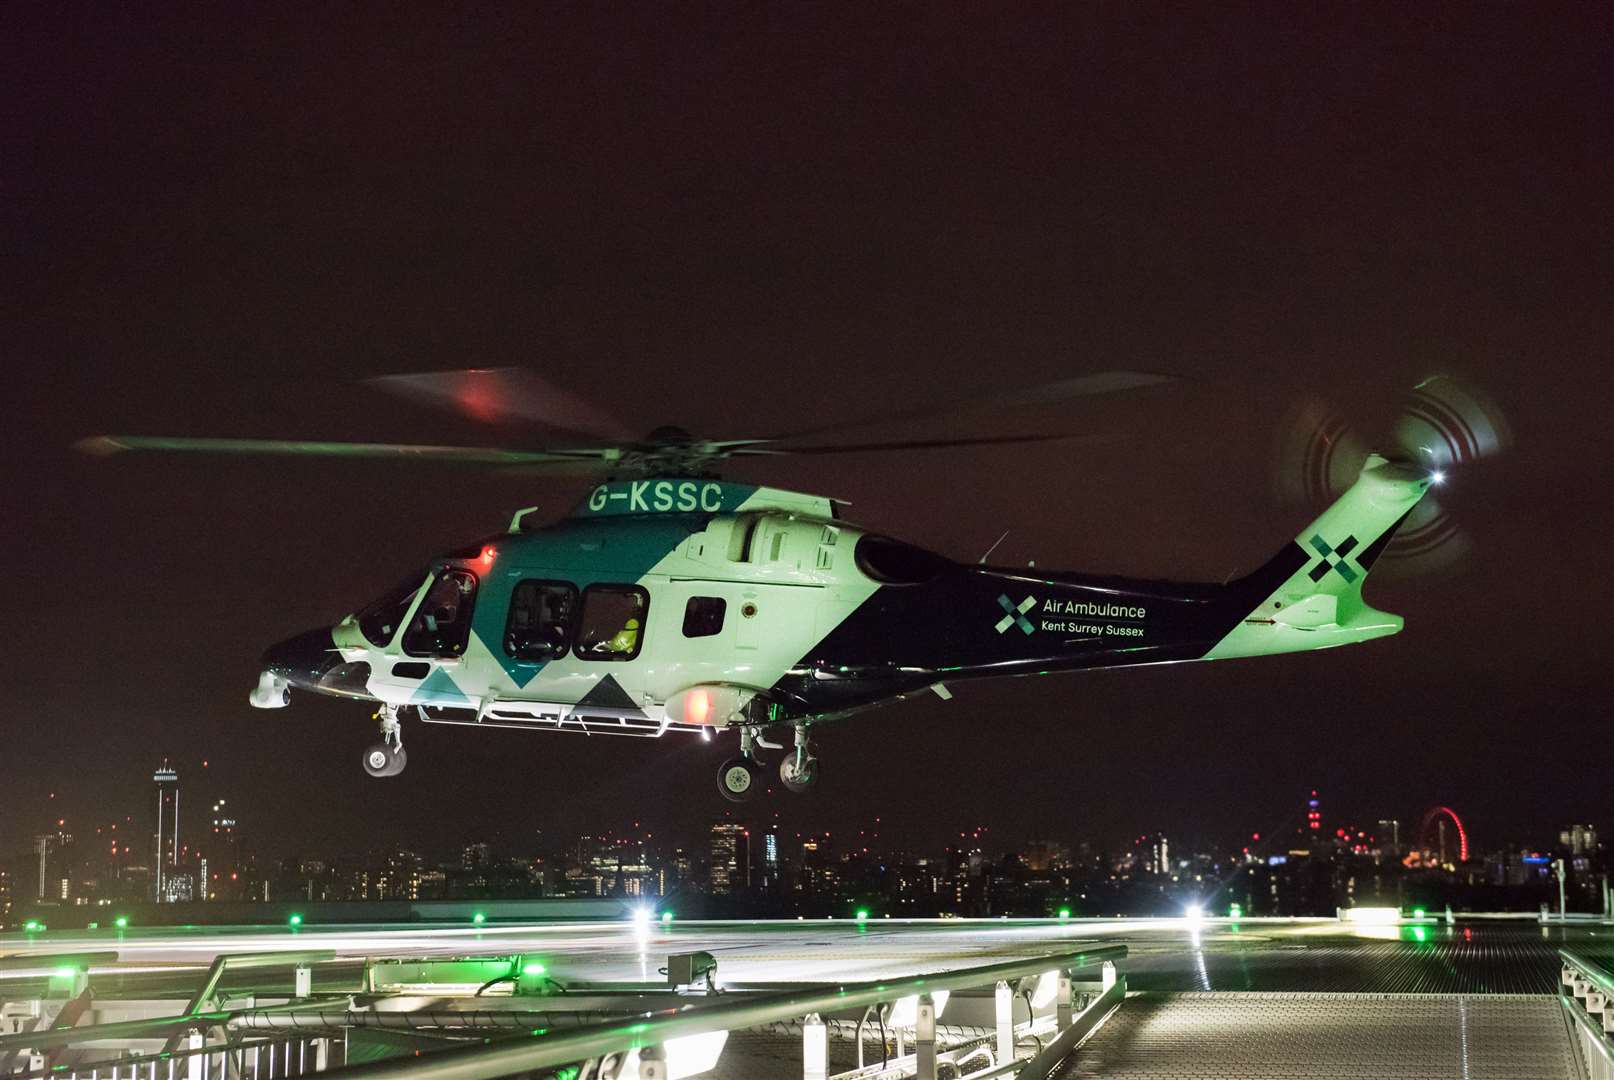 A night landing at King's College Hospital in London